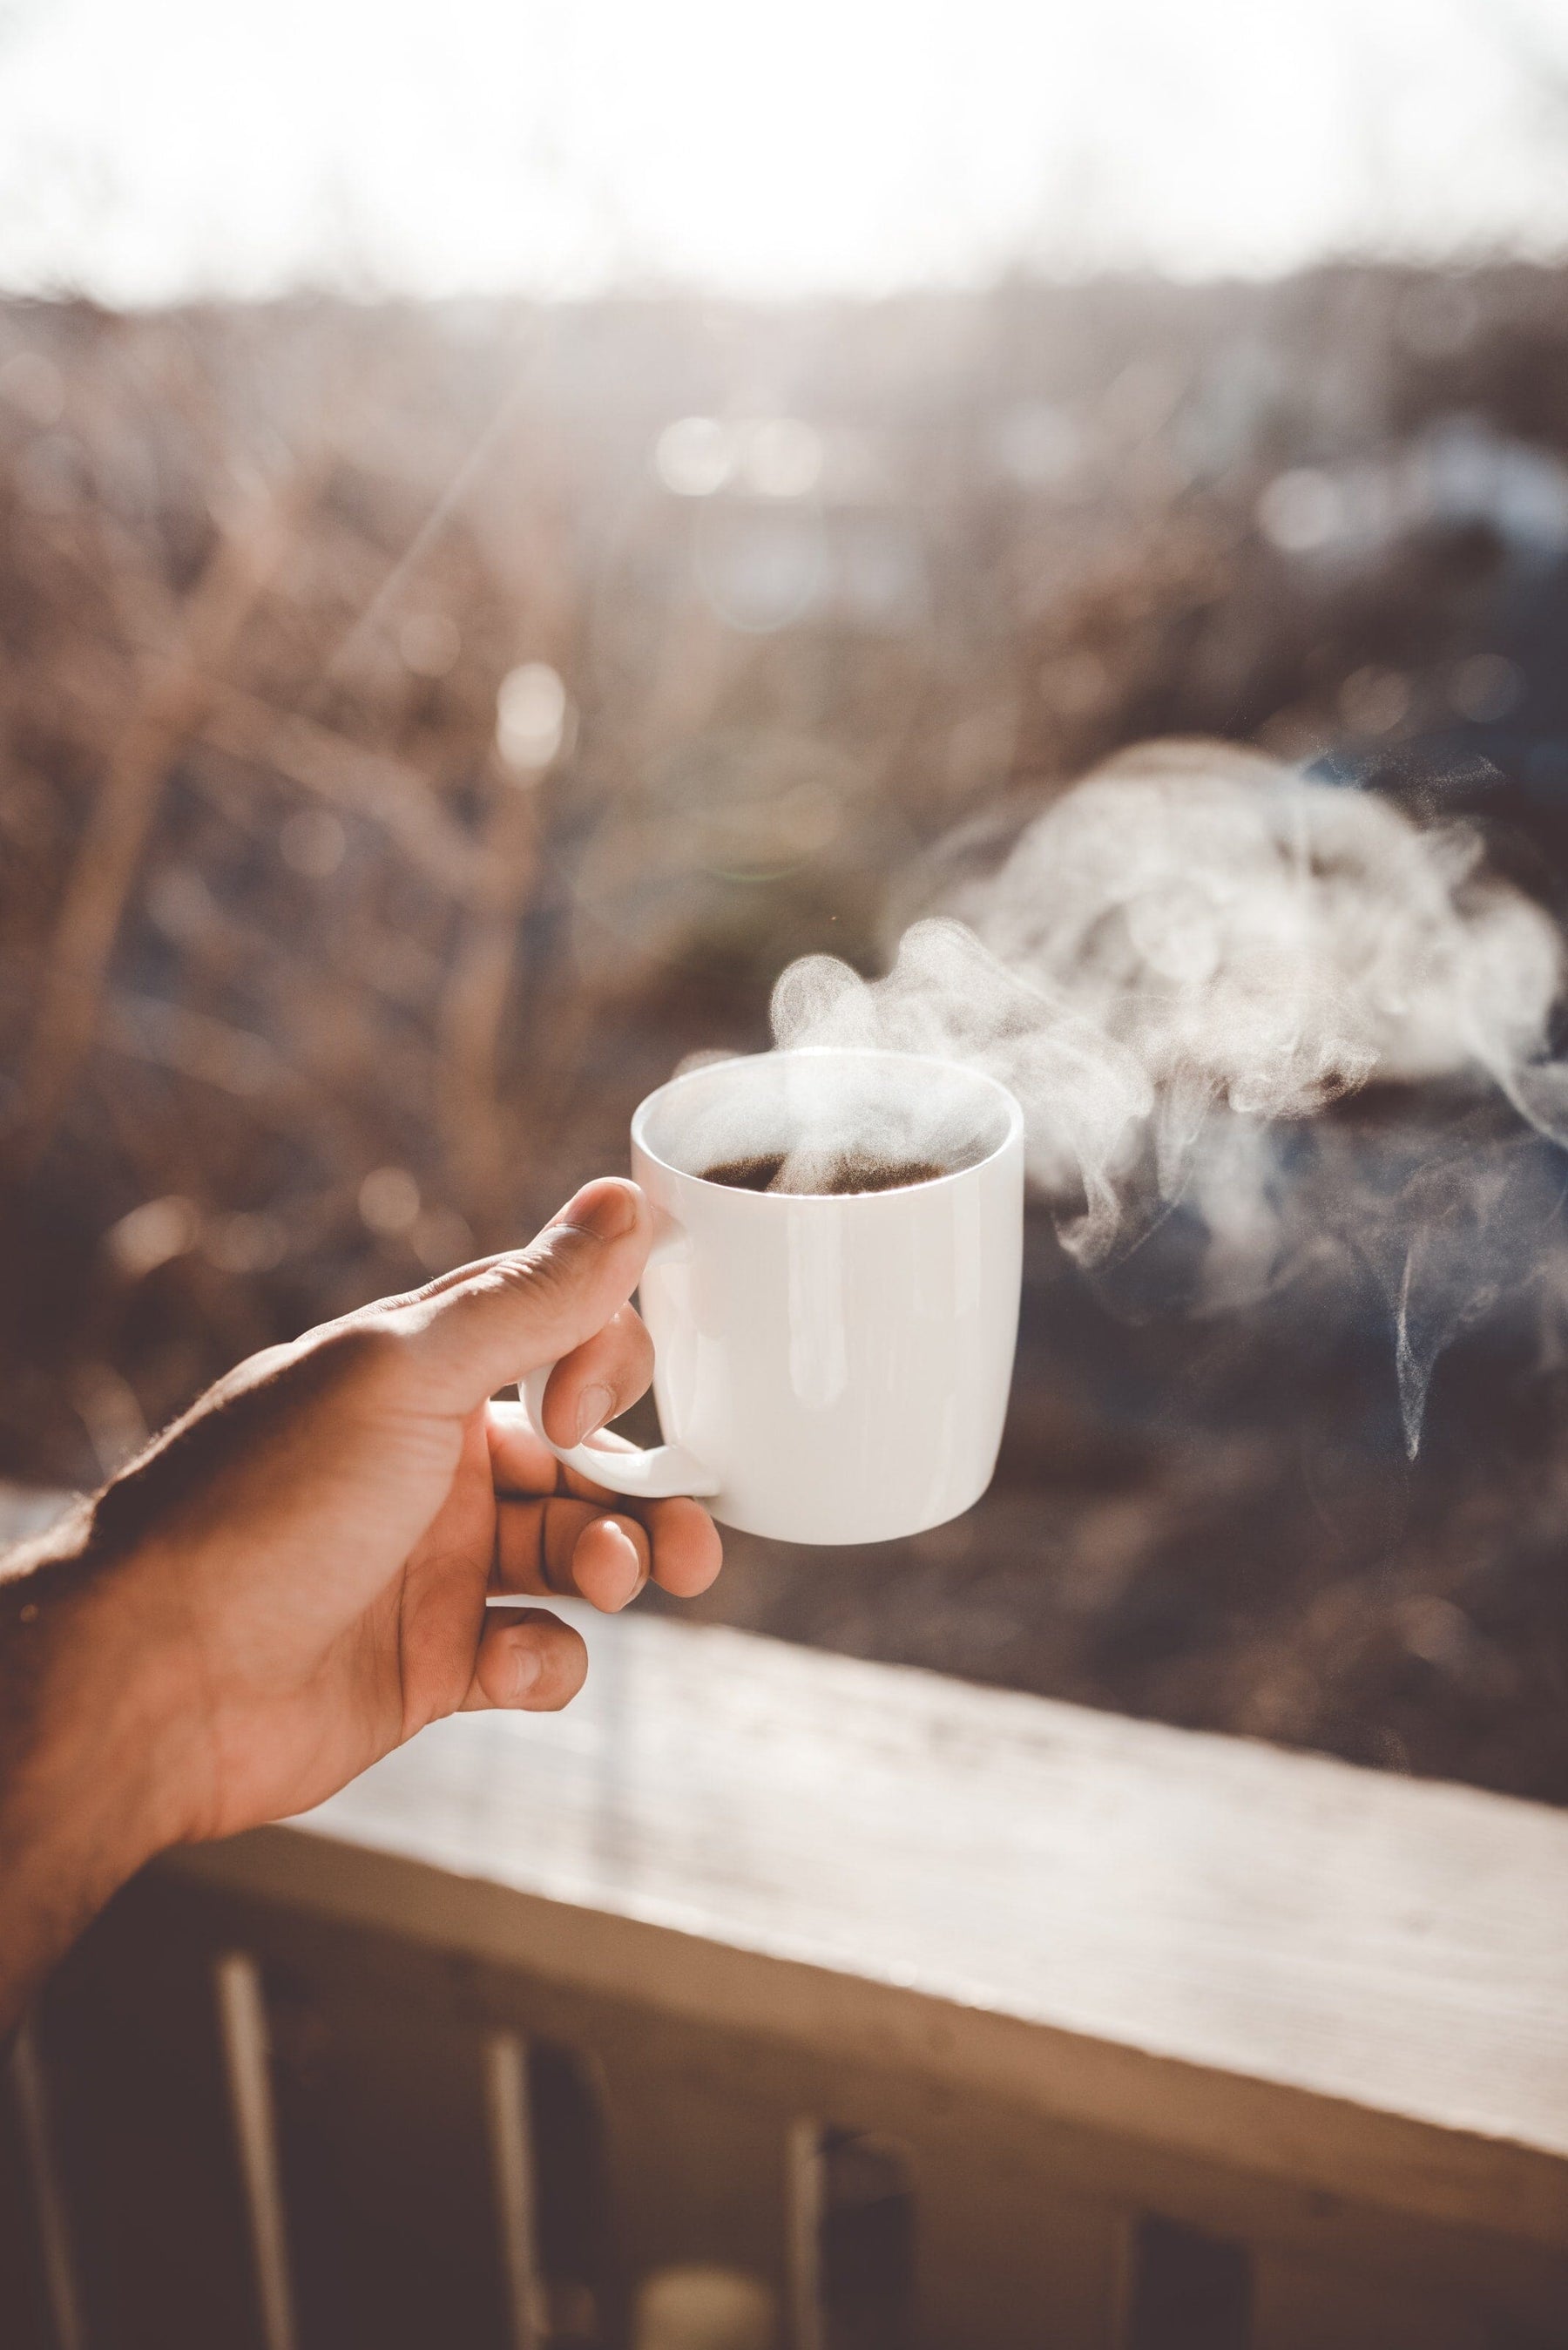 I Started To Wait 90 Minutes After Waking Up To Drink My Morning Coffee - Here’s What Happened